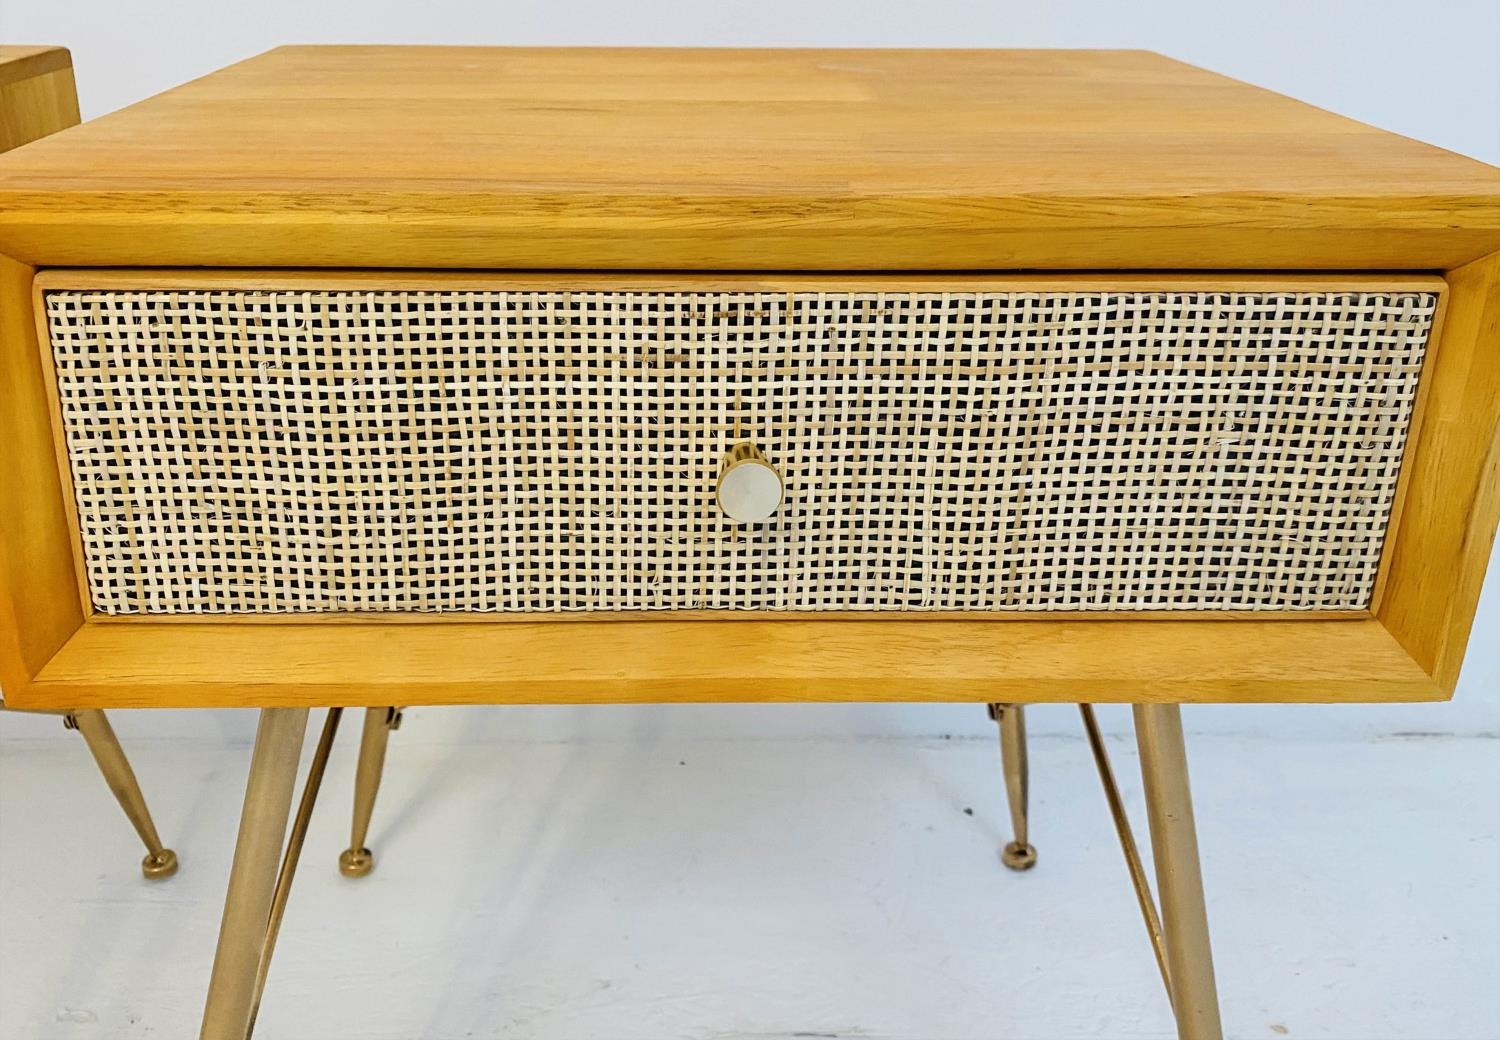 SIDE TABLES, a pair, 1960s Danish style, each with one drawer, rattan fronted detail, 52cm x 46cm - Image 4 of 5